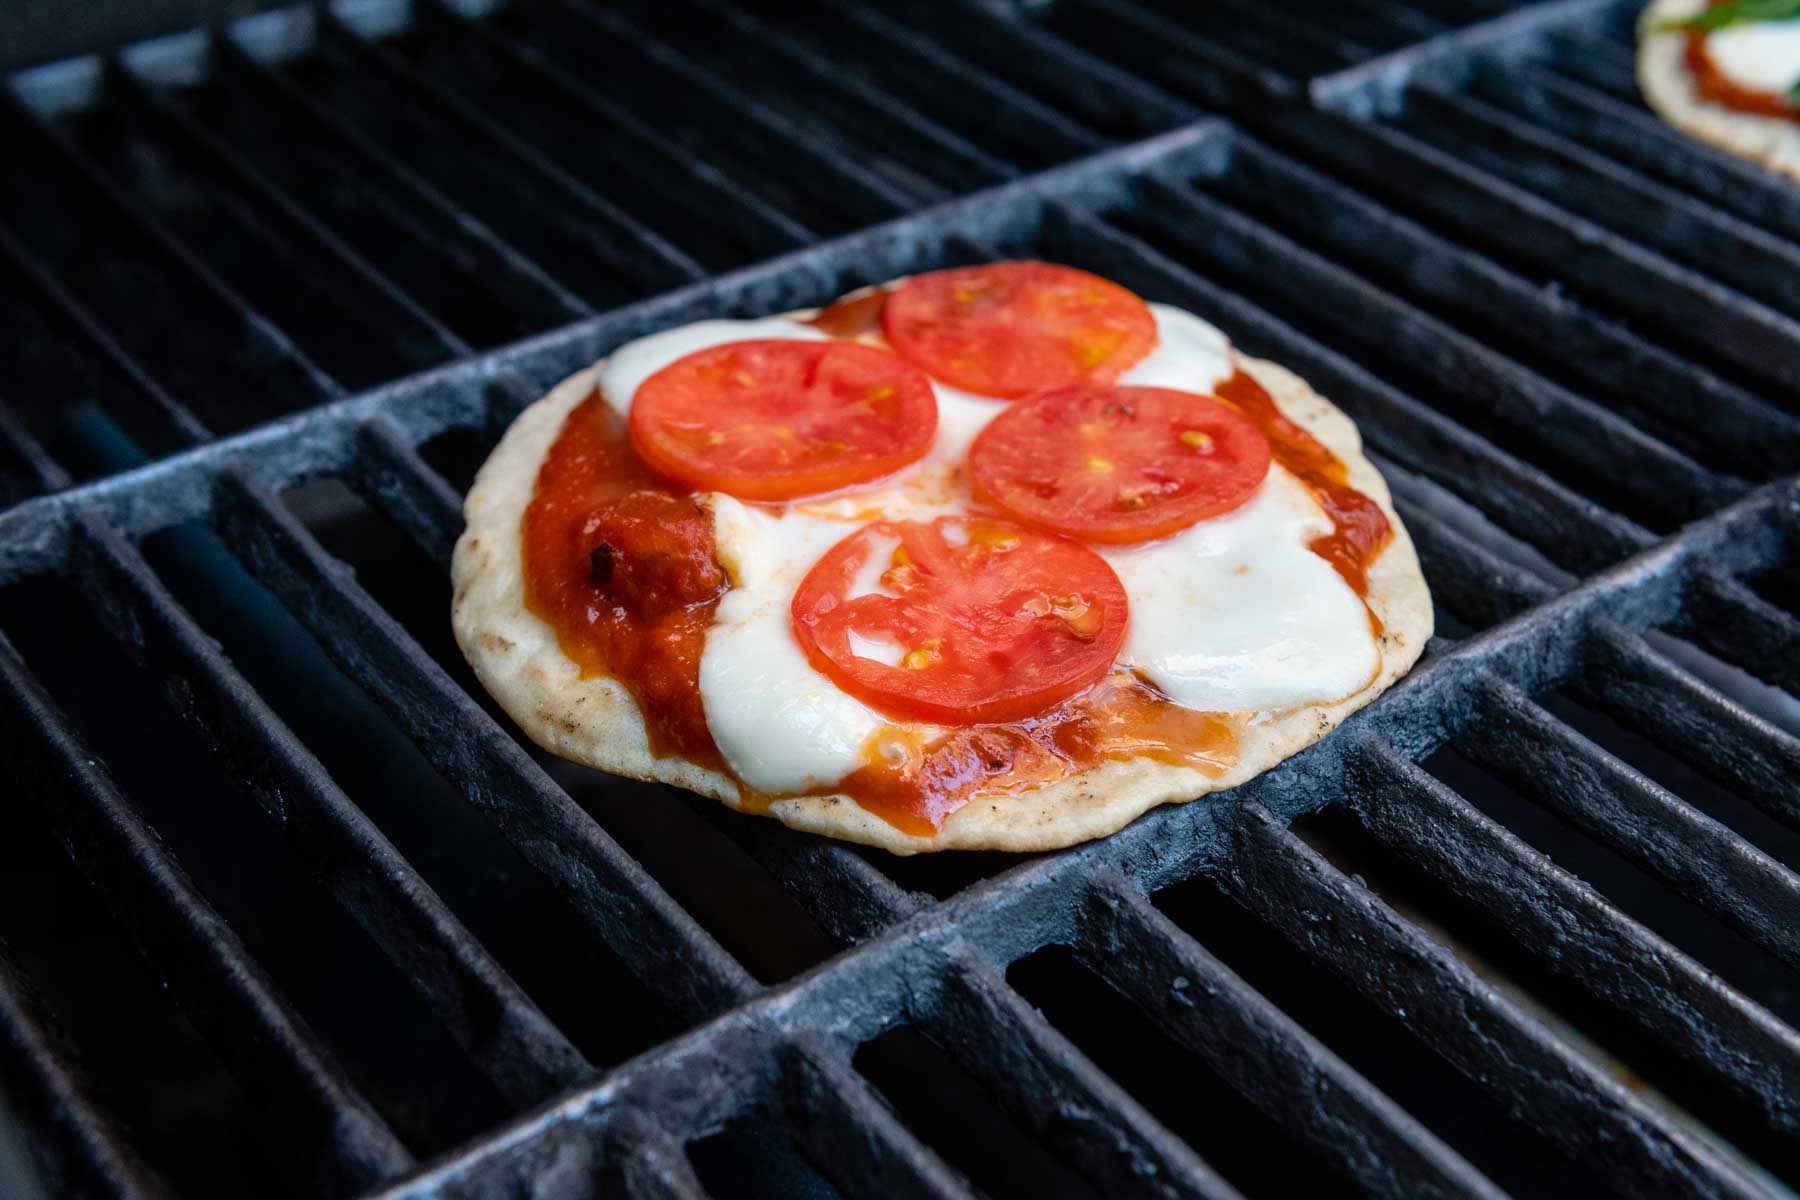 a pizza cooking on a grill with tomatoes and mozzarella.